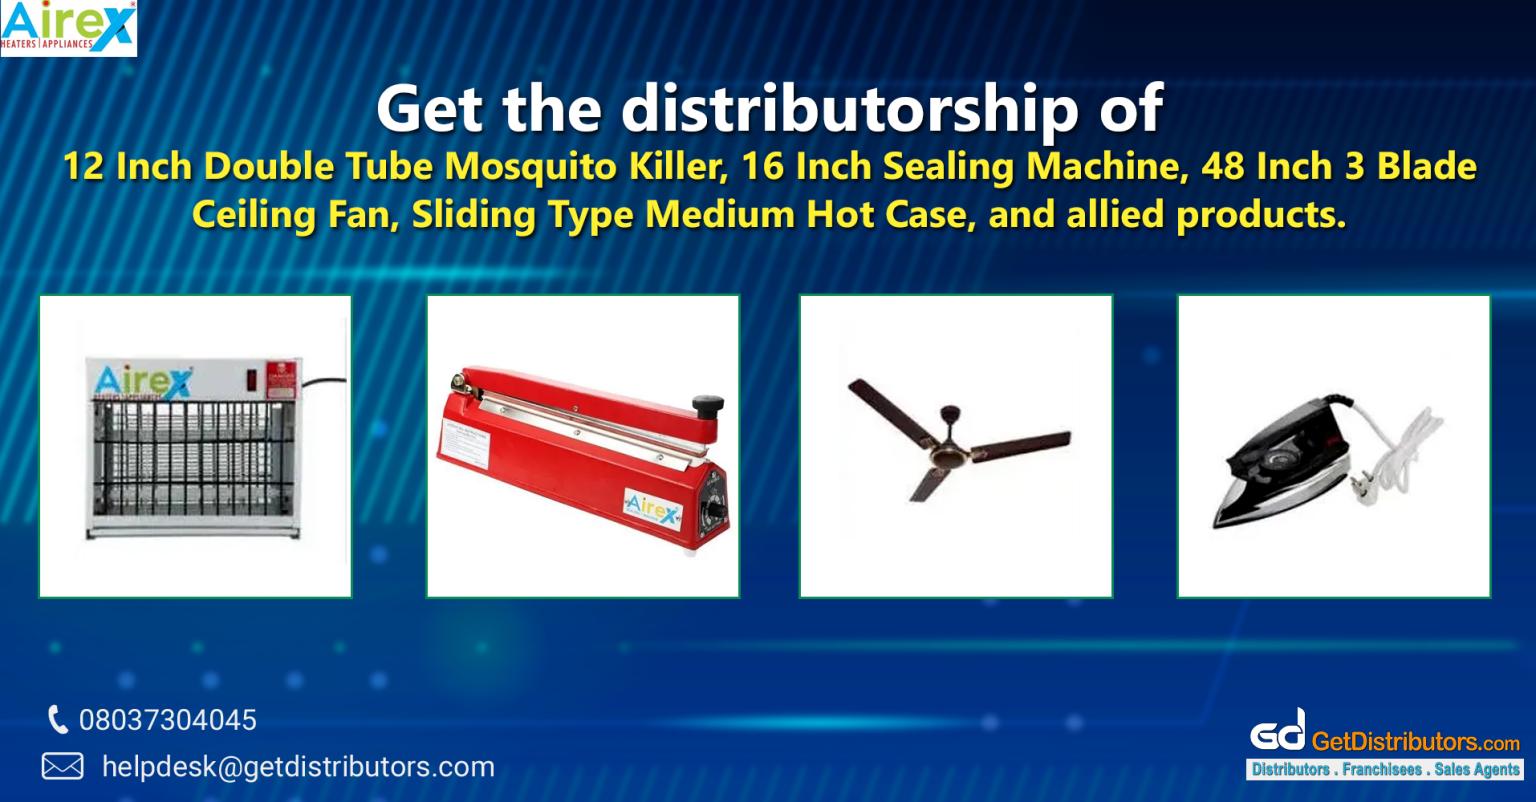 Offering sealing machine and electrical appliances for distribution